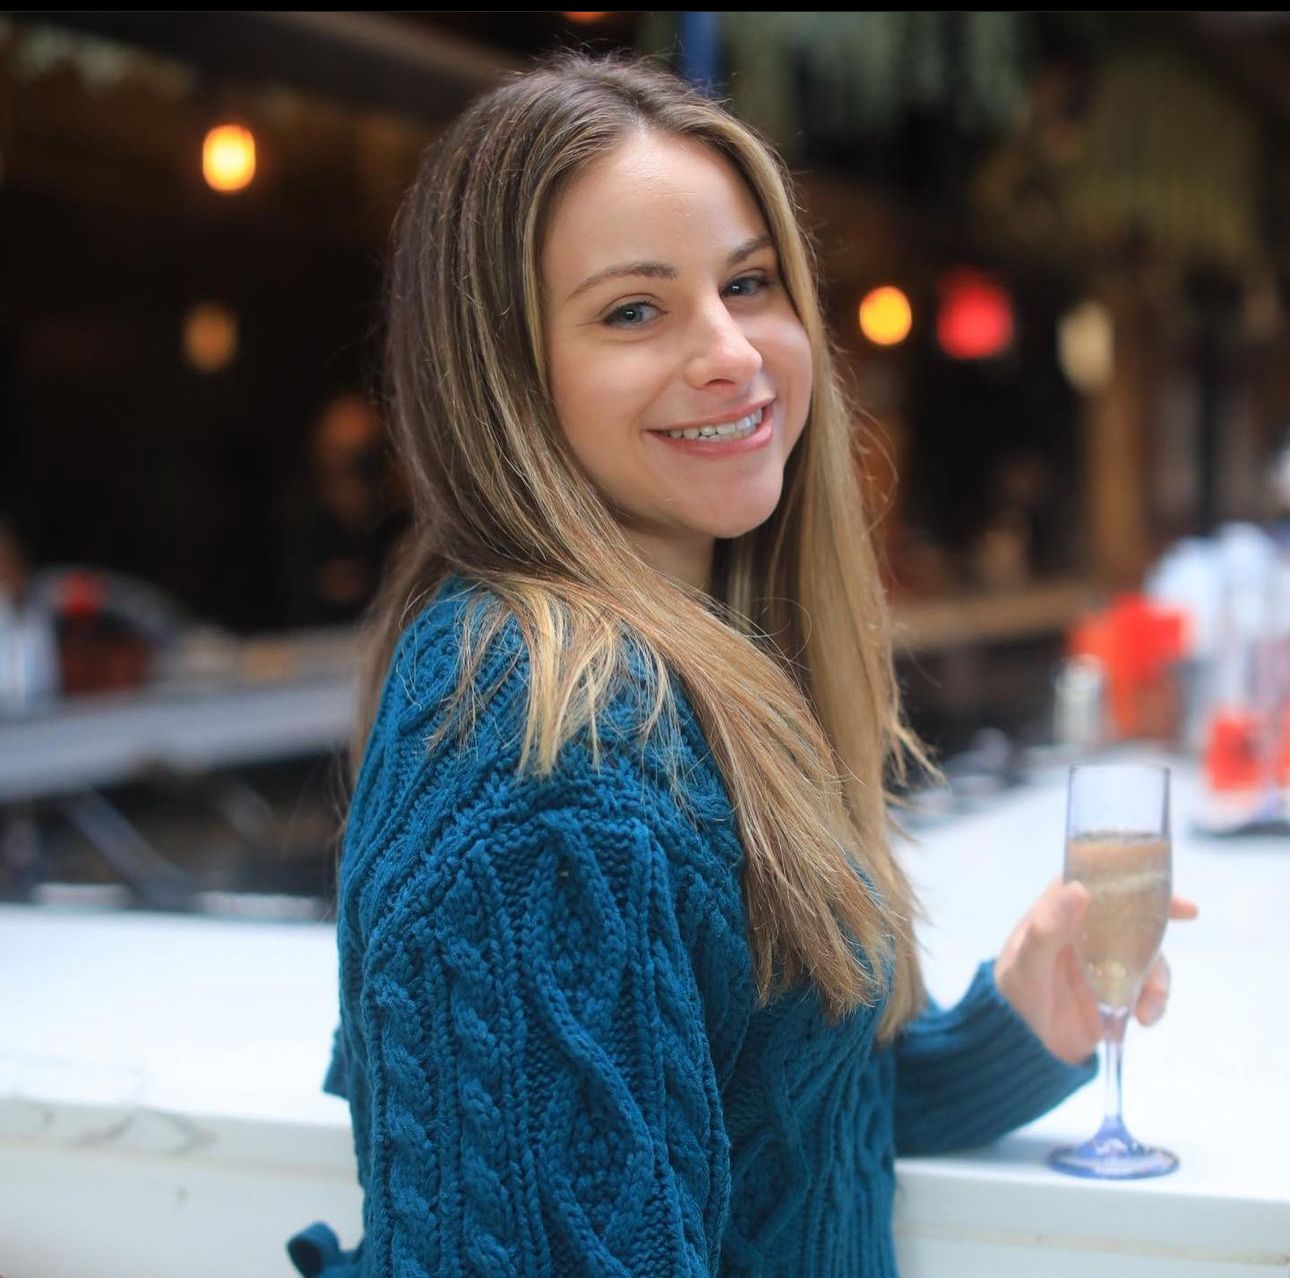 A woman in a blue sweater is holding a glass of champagne